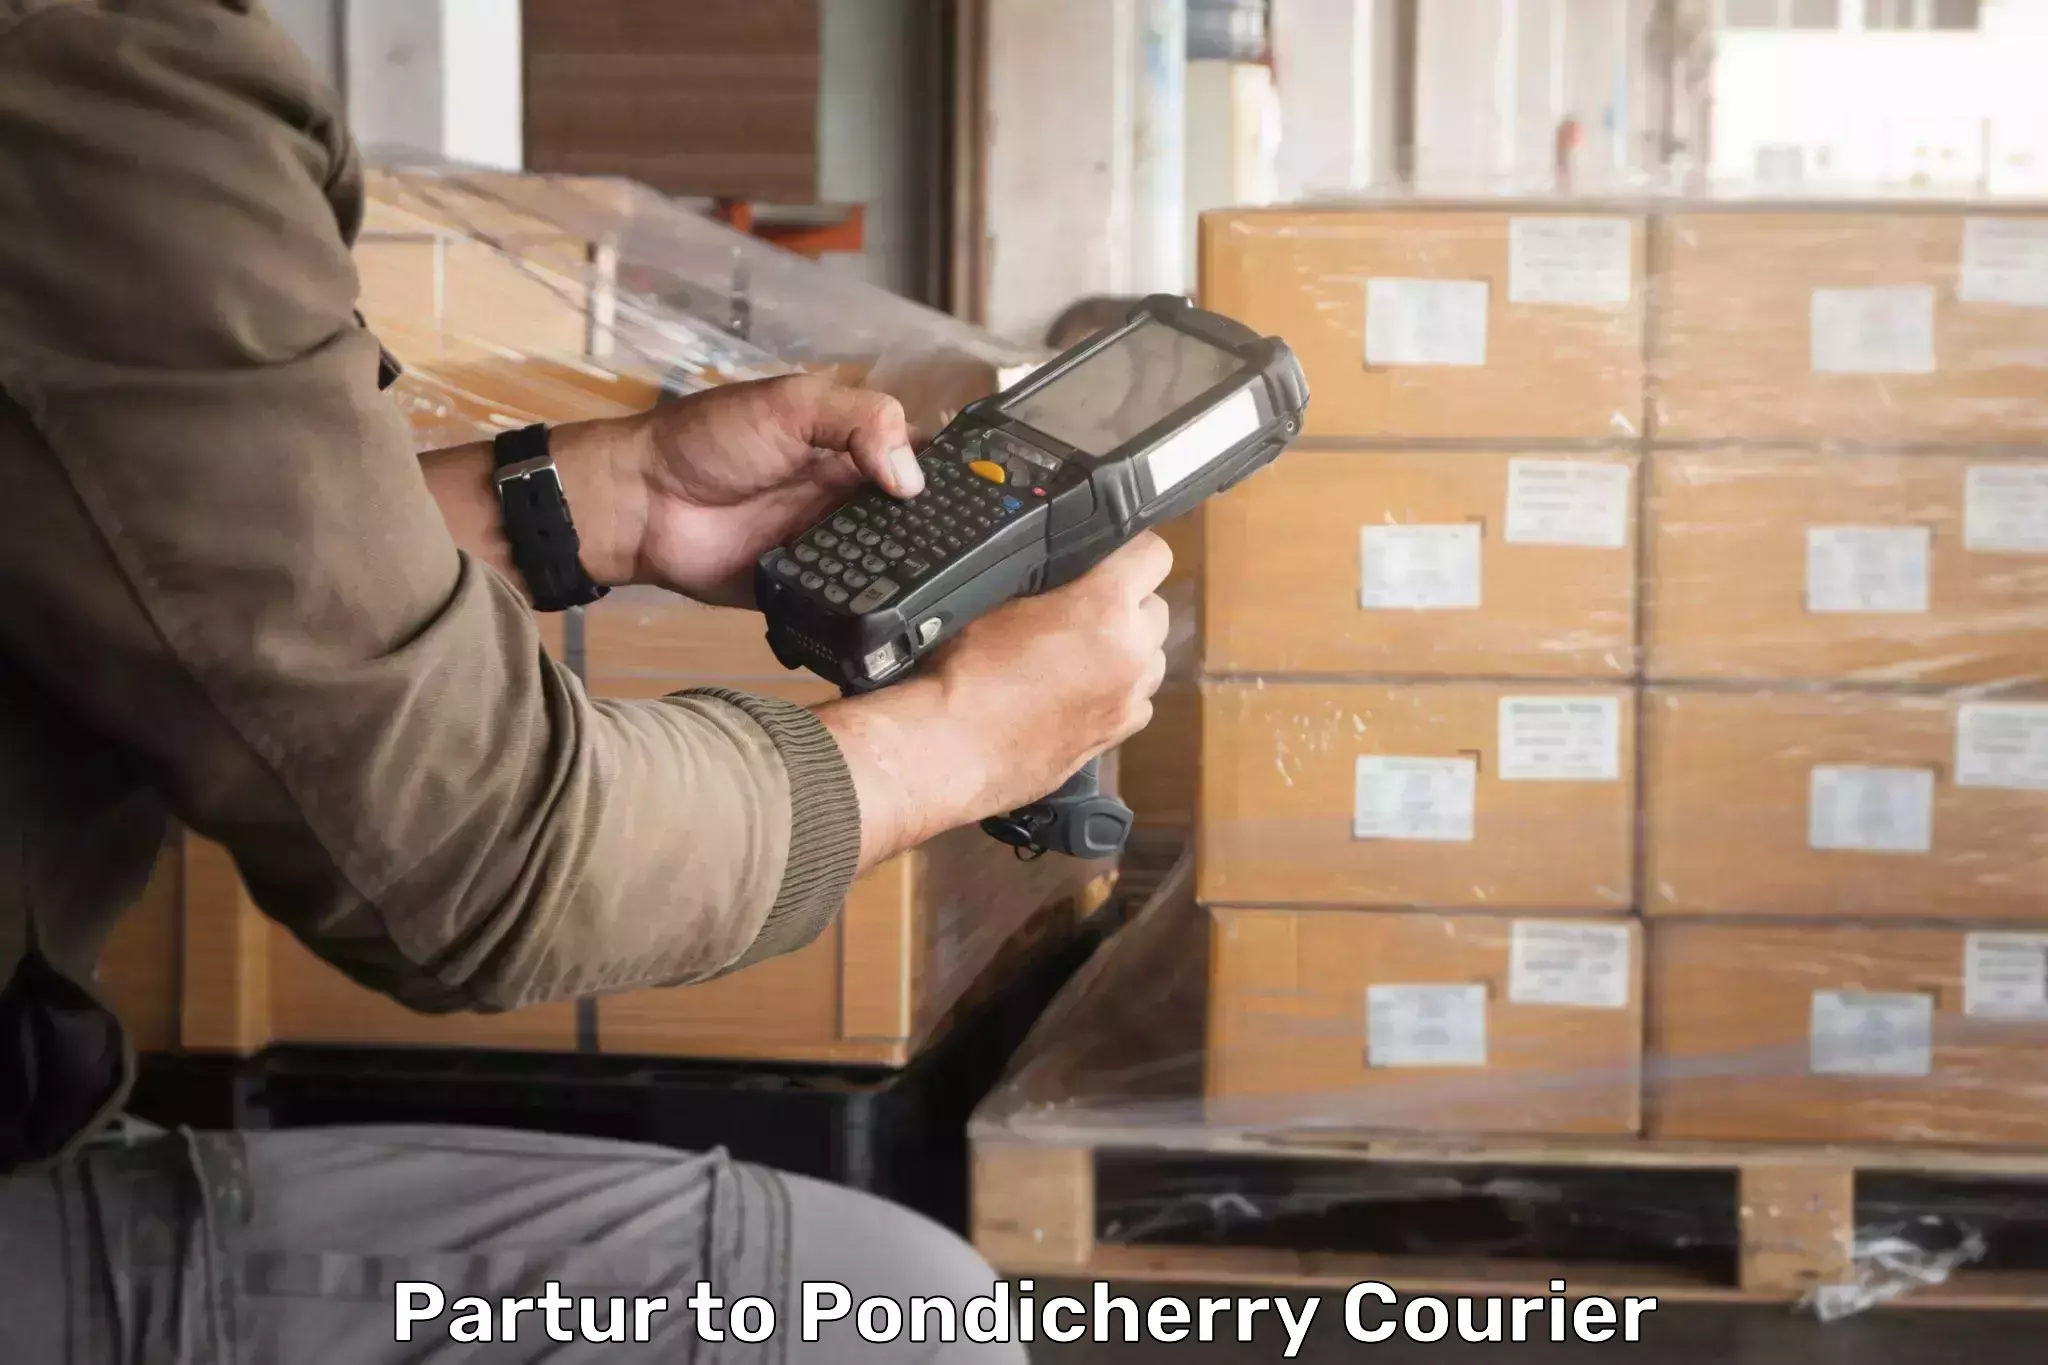 Expedited shipping methods Partur to Pondicherry